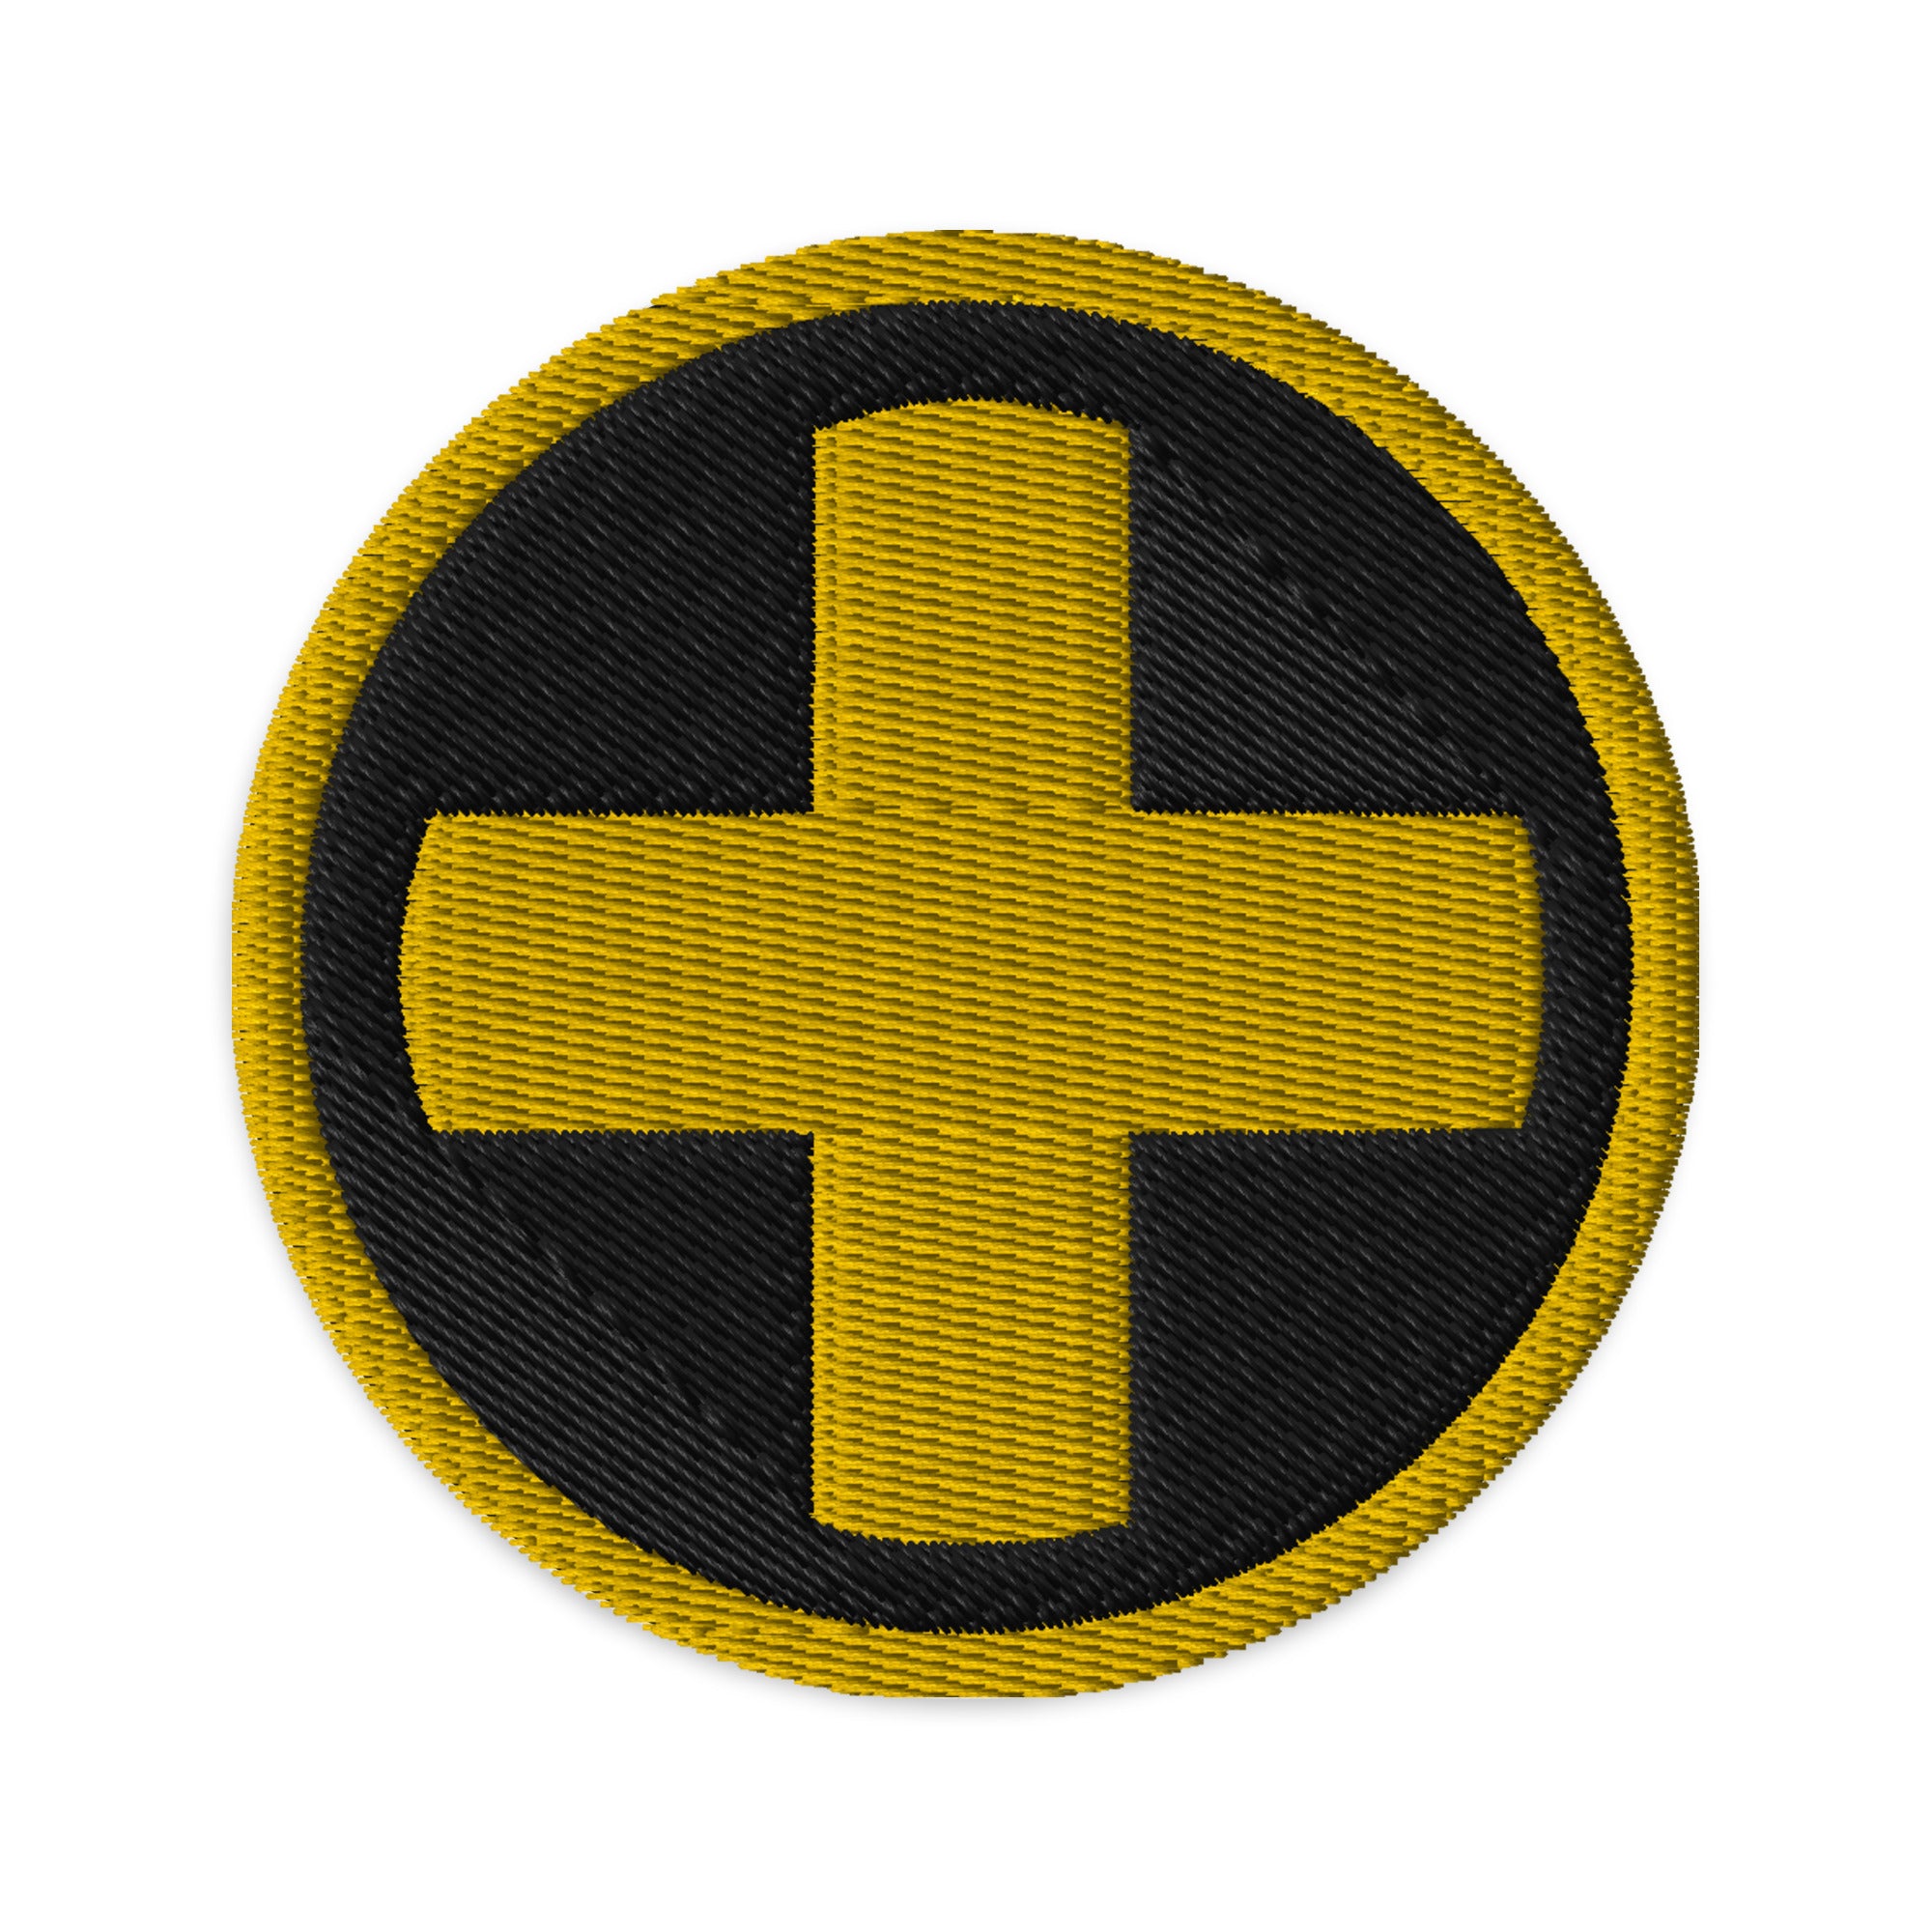 Medic BF1 Embroidered Patch